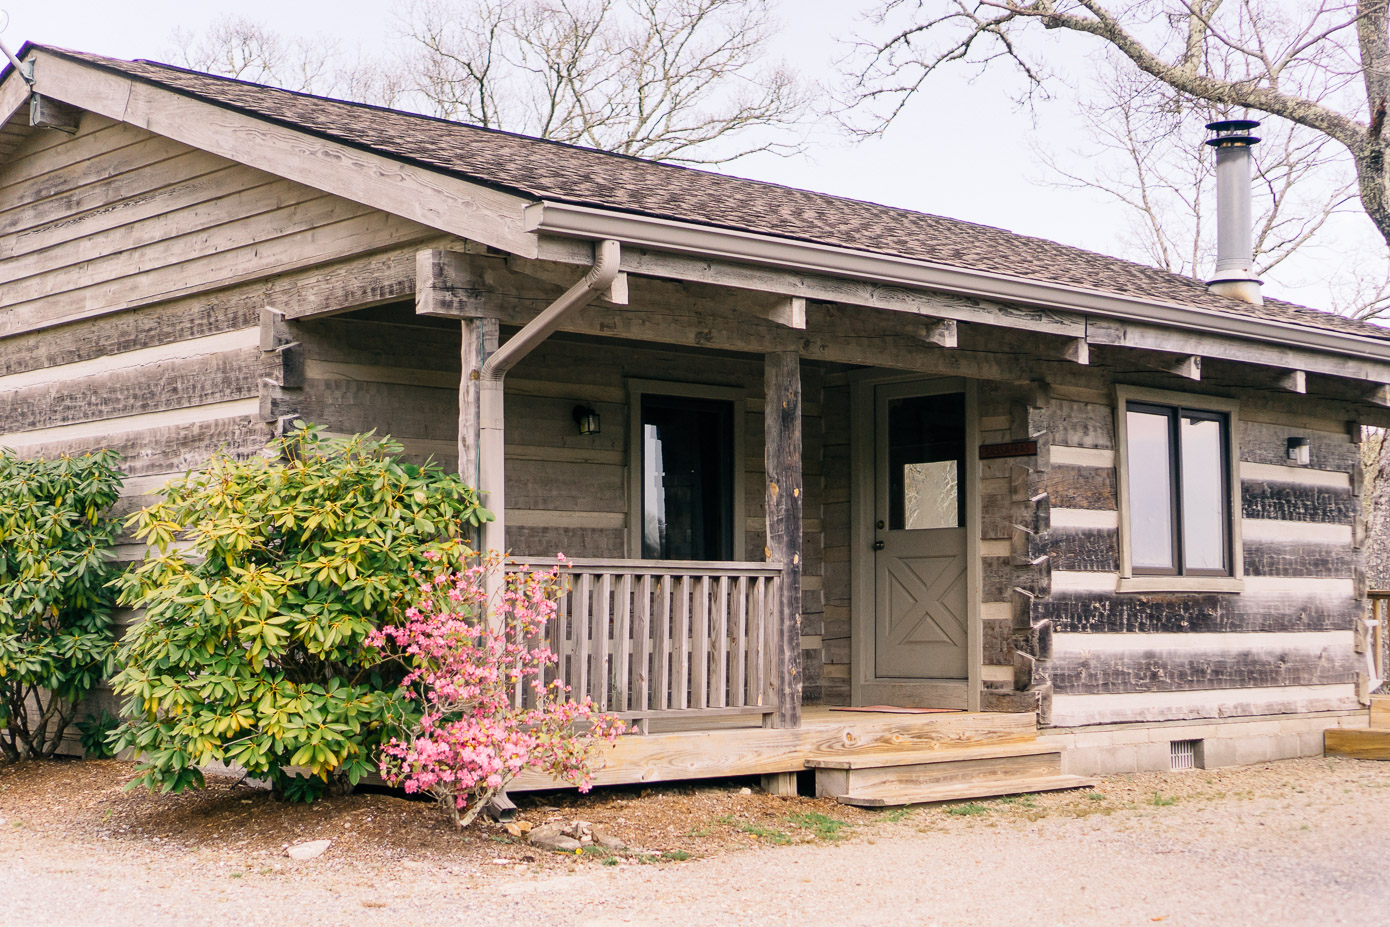 Cataloochee Ranch Review | Where to Rent a Cabin in the NC Mountains | Louella Reese Life & Style Blog